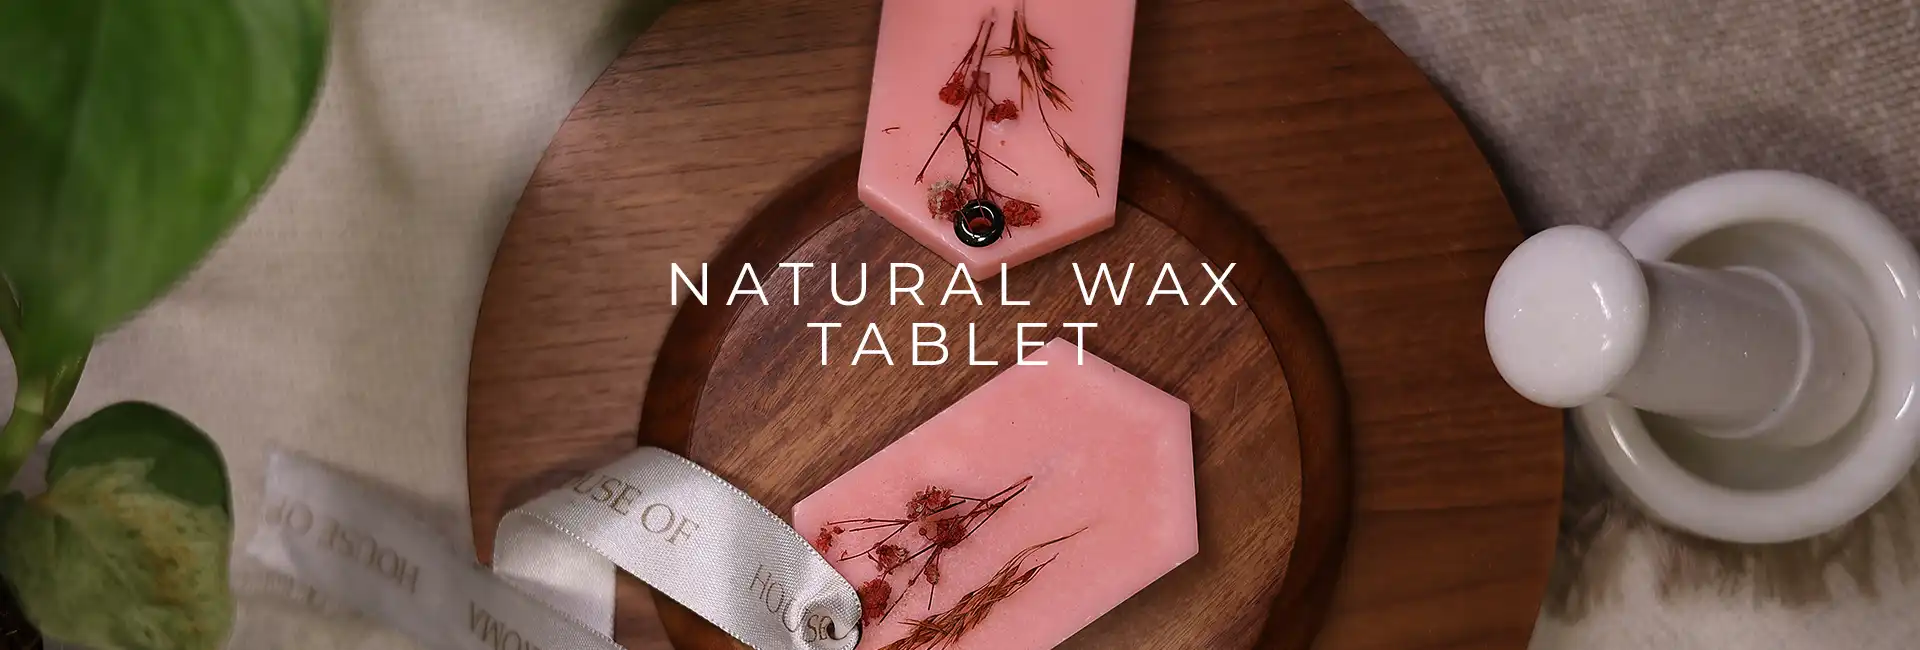 Wax Aroma Tablets - Lavender and Lemon – Jooce Bath and Body Products